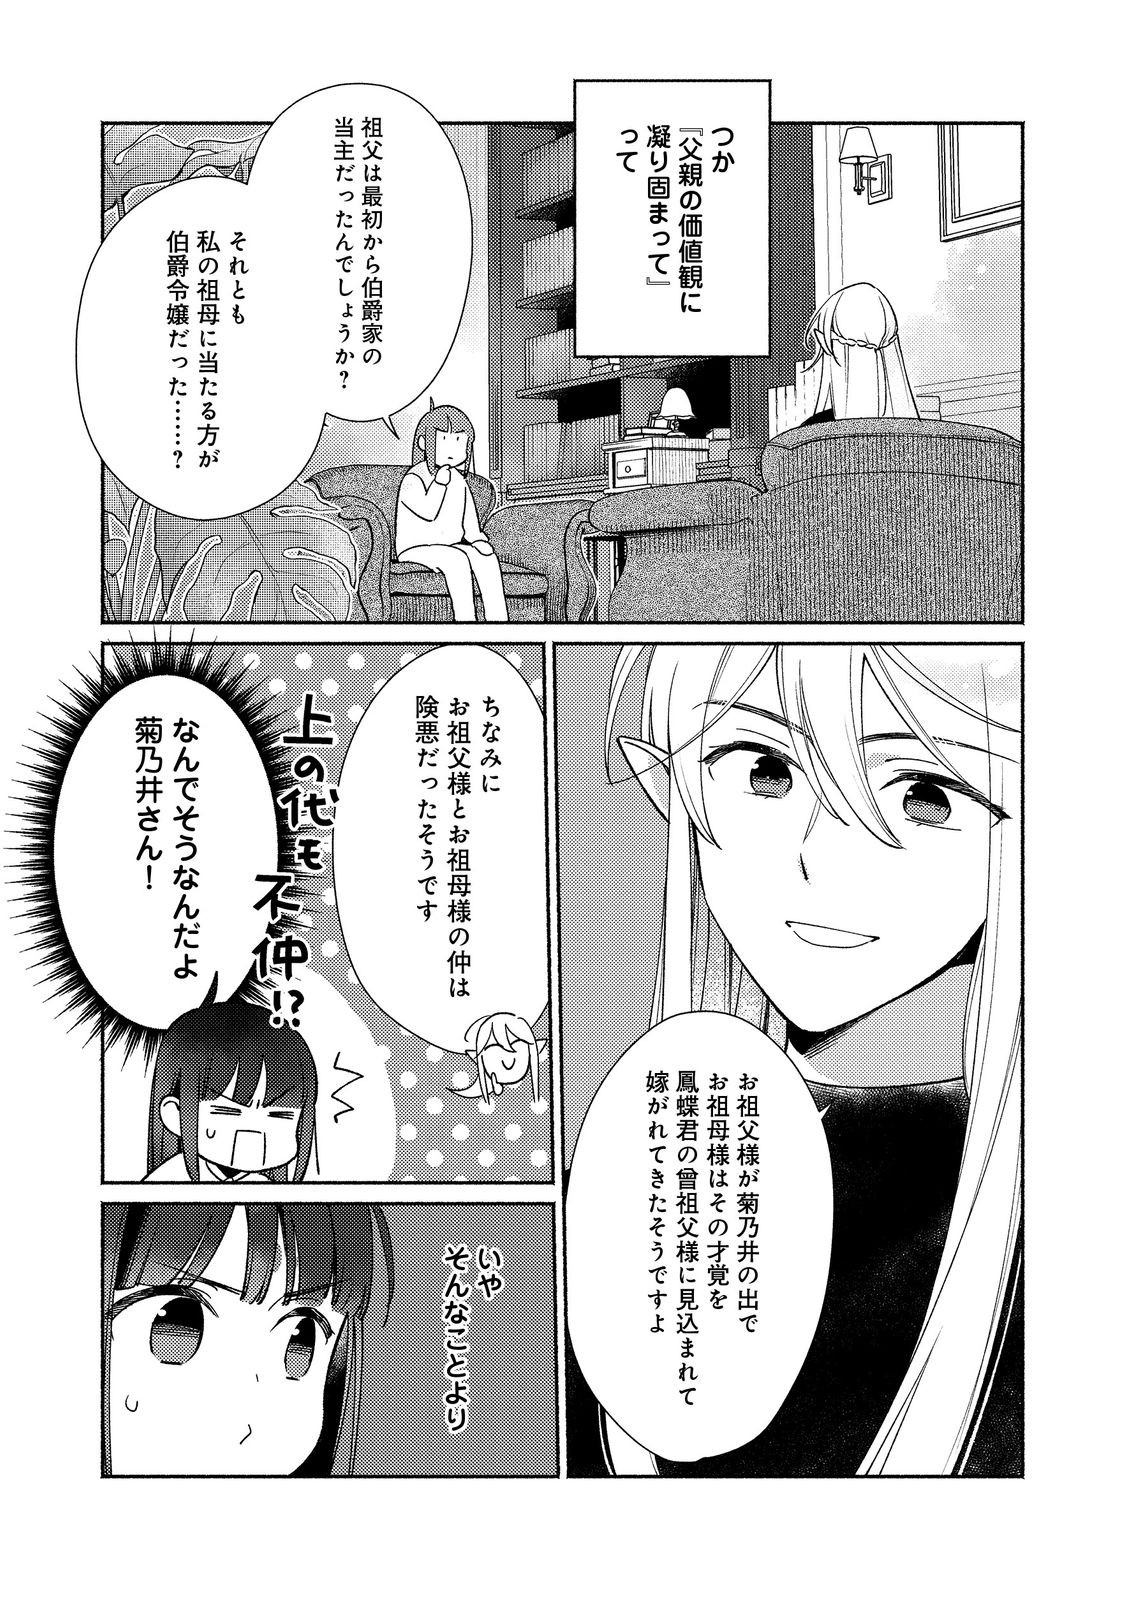 I’m the White Pig Nobleman 第25.1話 - Page 5